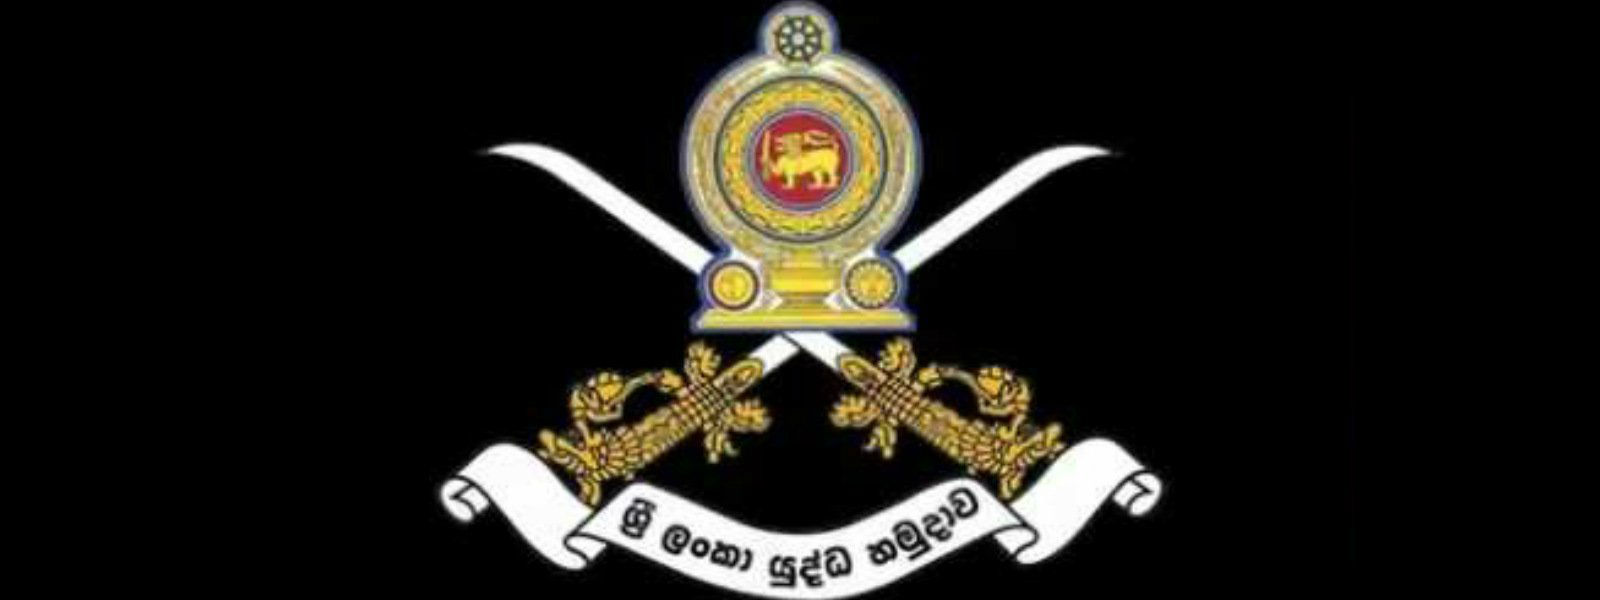 244 promotions for members of the Sri Lanka Army